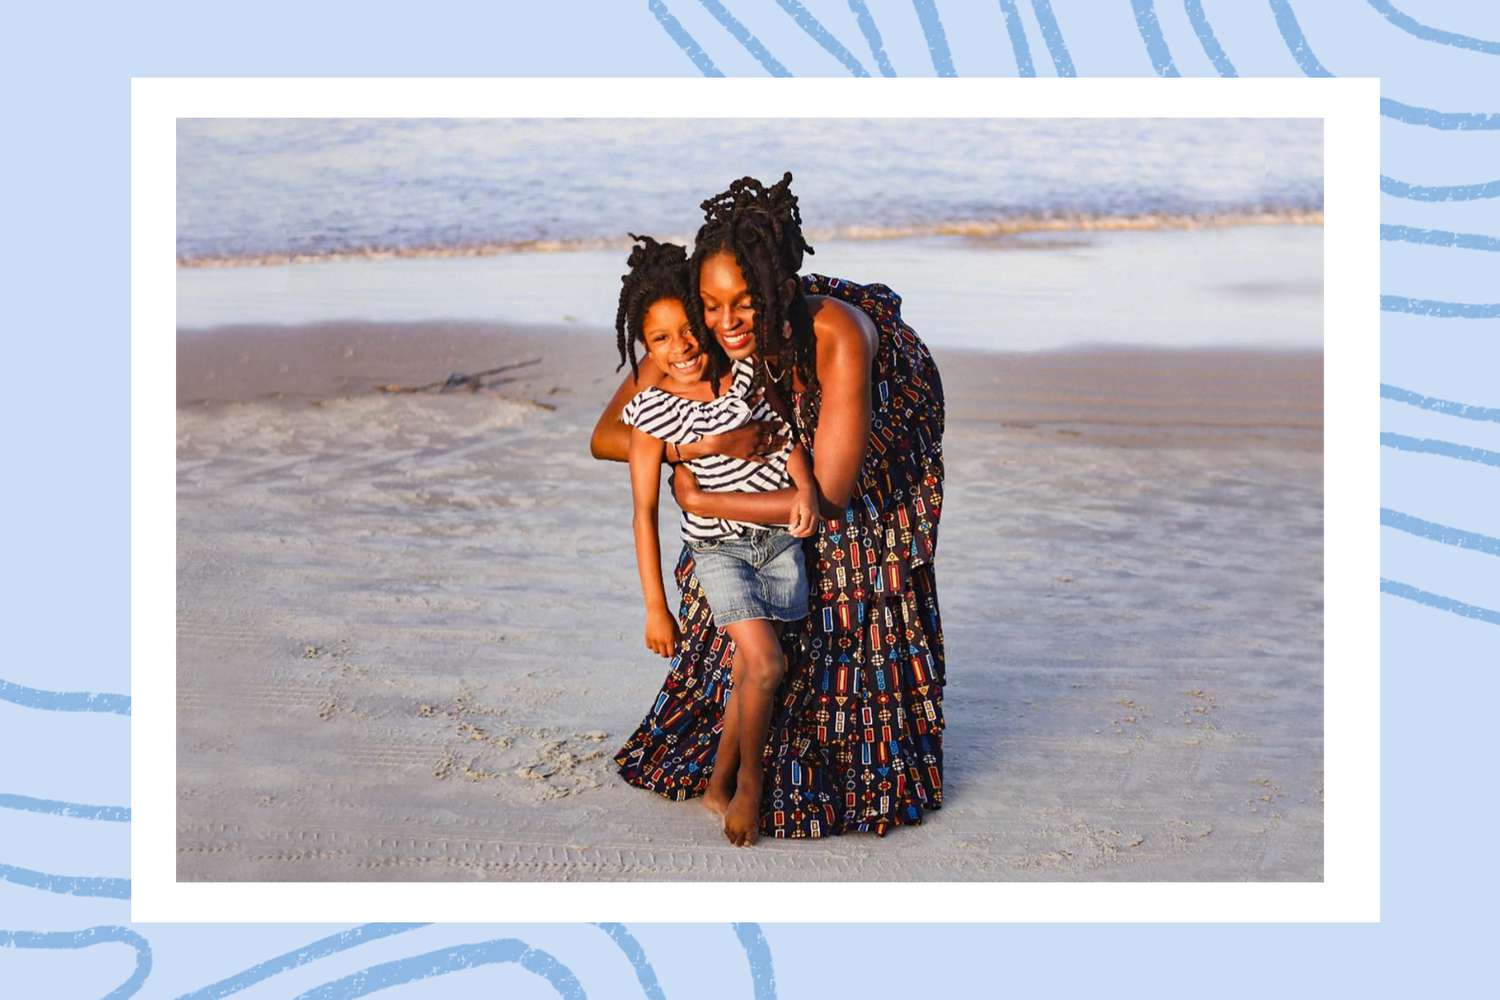 Shanicia Boswell and her daughter on a beach